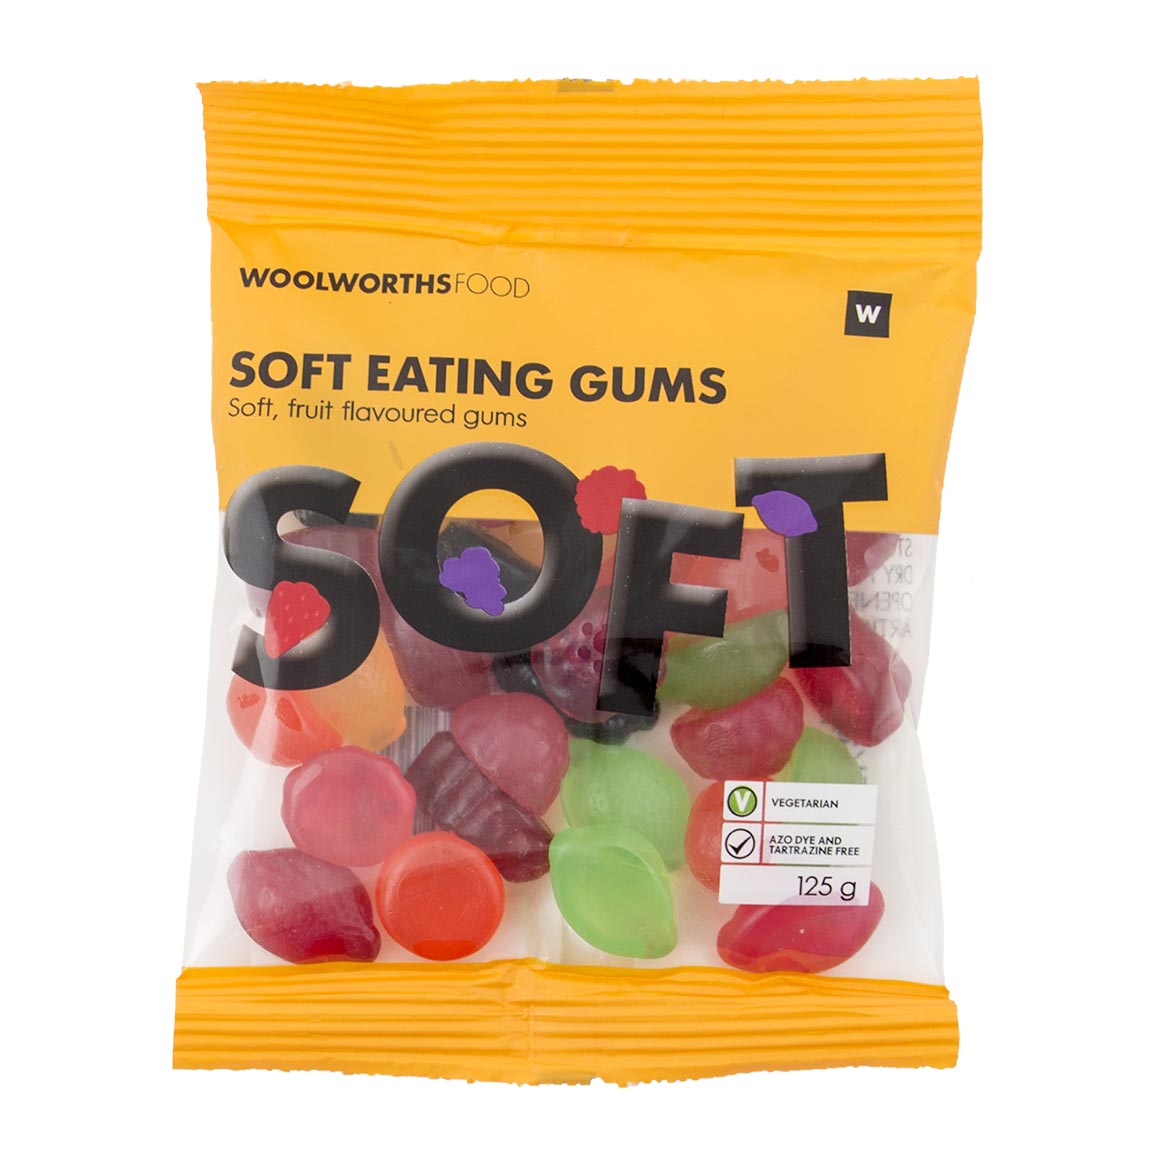 WOOLWORTHS SOFT EATING GUMS 125